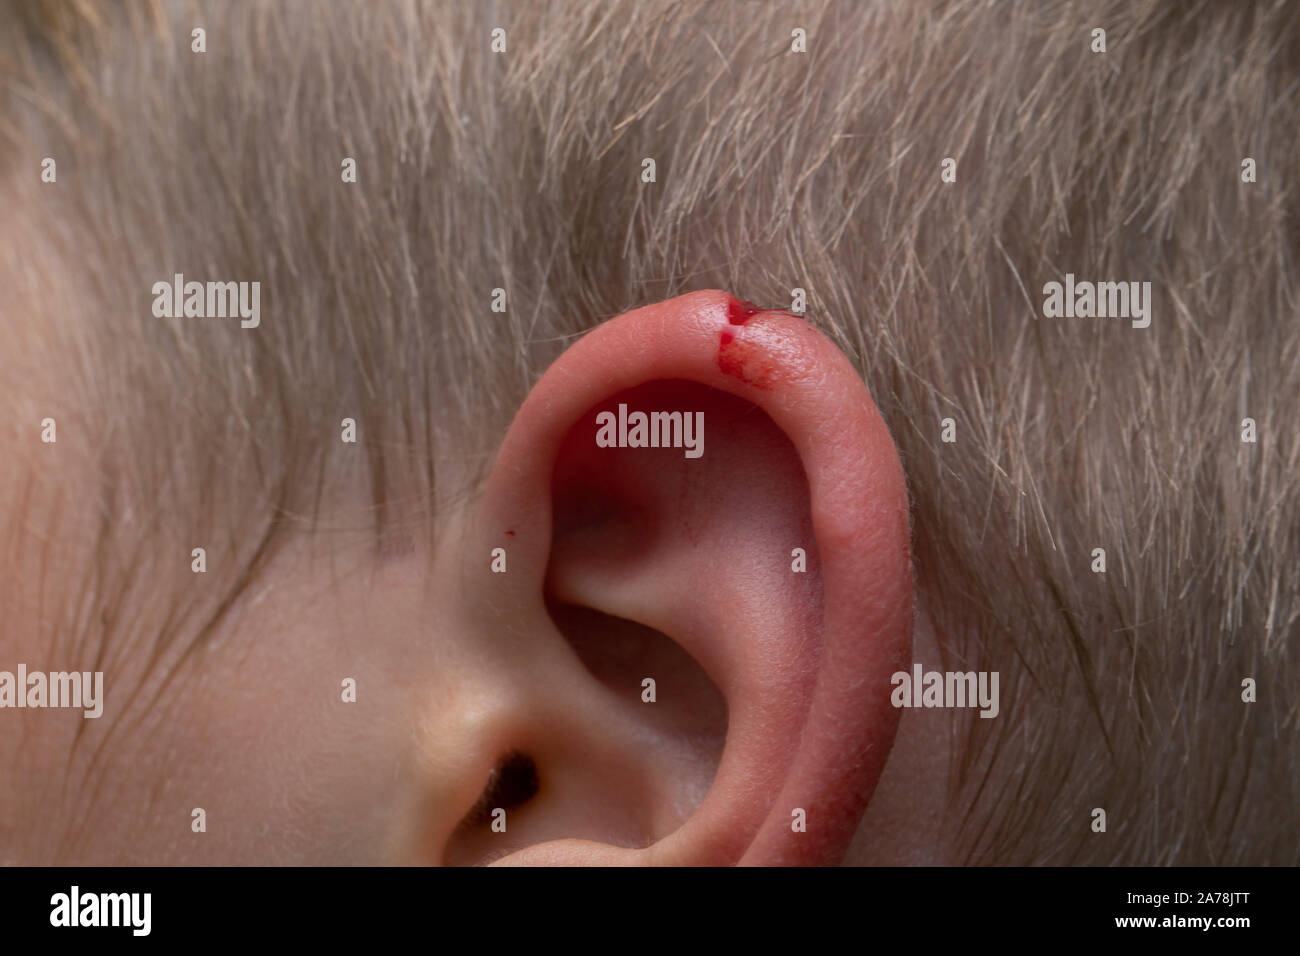 laceration in a child. A wound on the ear of young toddler. fresh bleeding auricle rupture. Close up view. Medical, personal injury and pain concept. Stock Photo